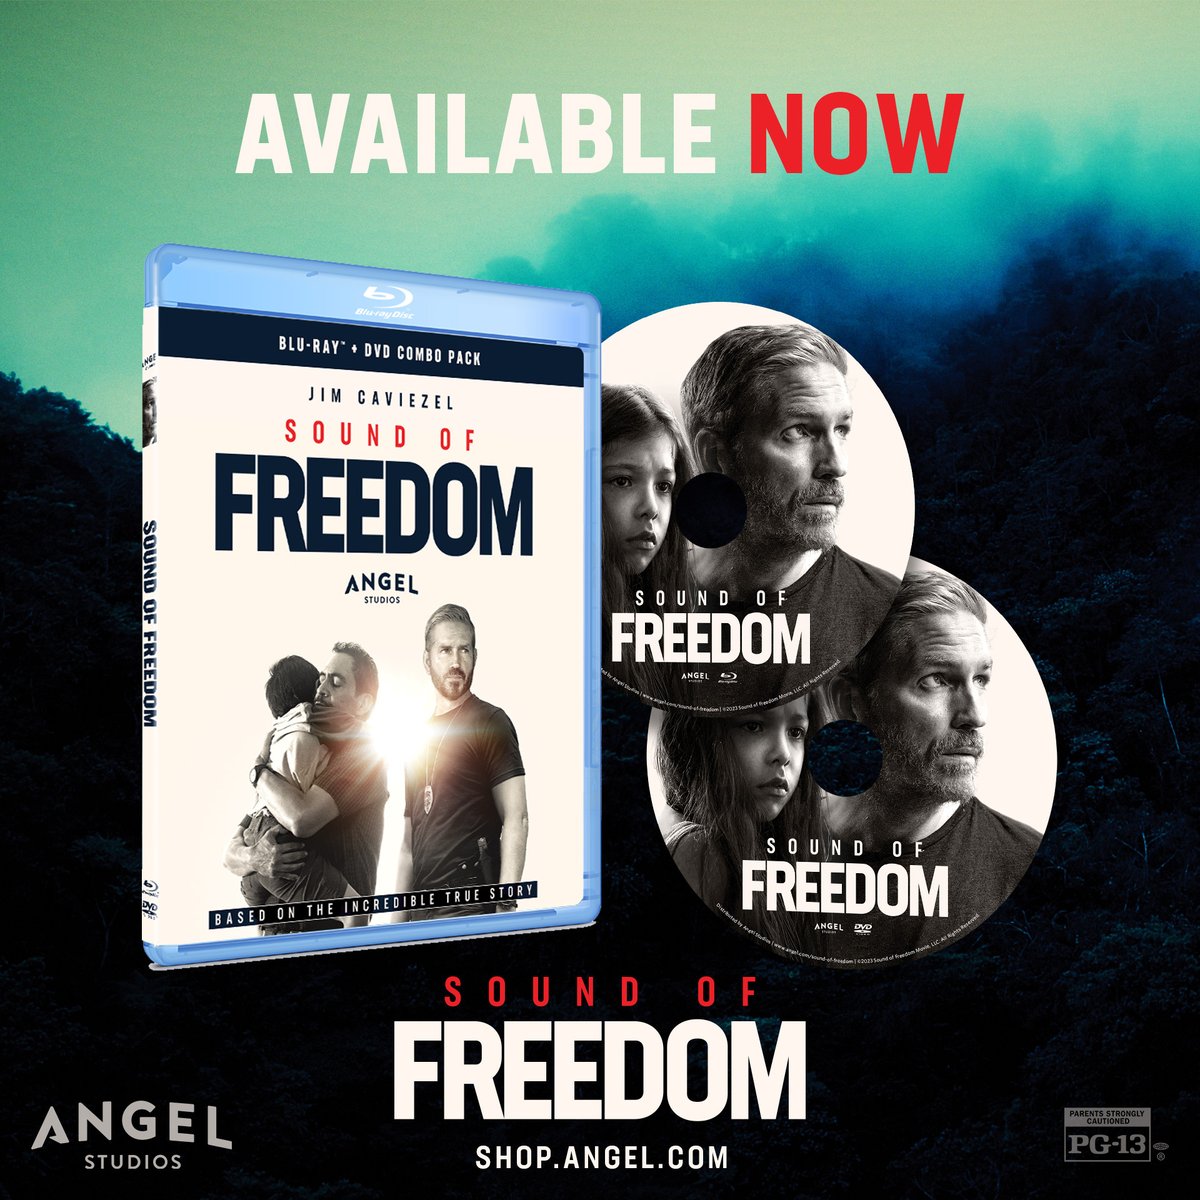 'Sound of Freedom' is available on DVD and Blue-Ray TODAY! You can get yours at shop.angel.com #SoundofFreedomMovie #AngelStudios #DVD #BlueRay